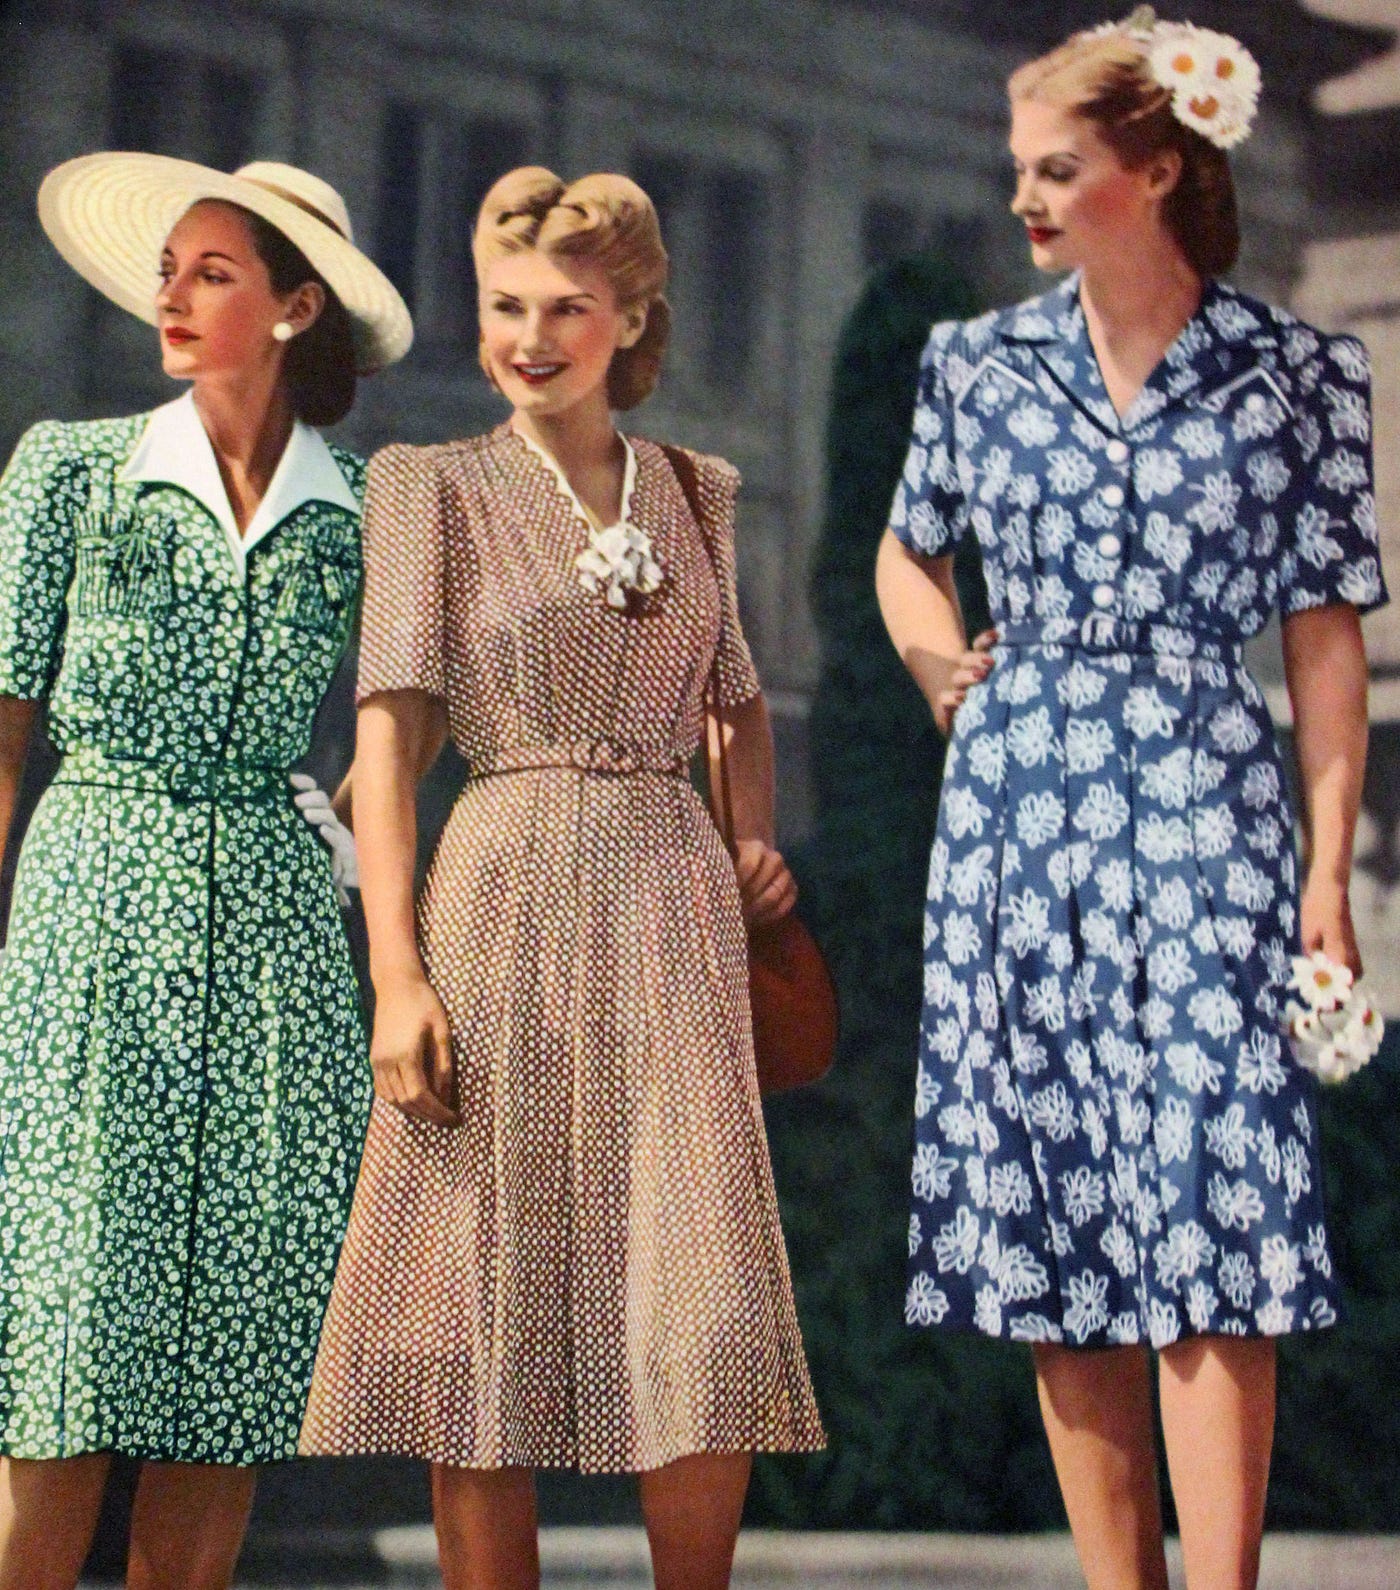 1940's Day Dress Styles. Much of the “vintage retro” look has…, by Karma  Thakrar